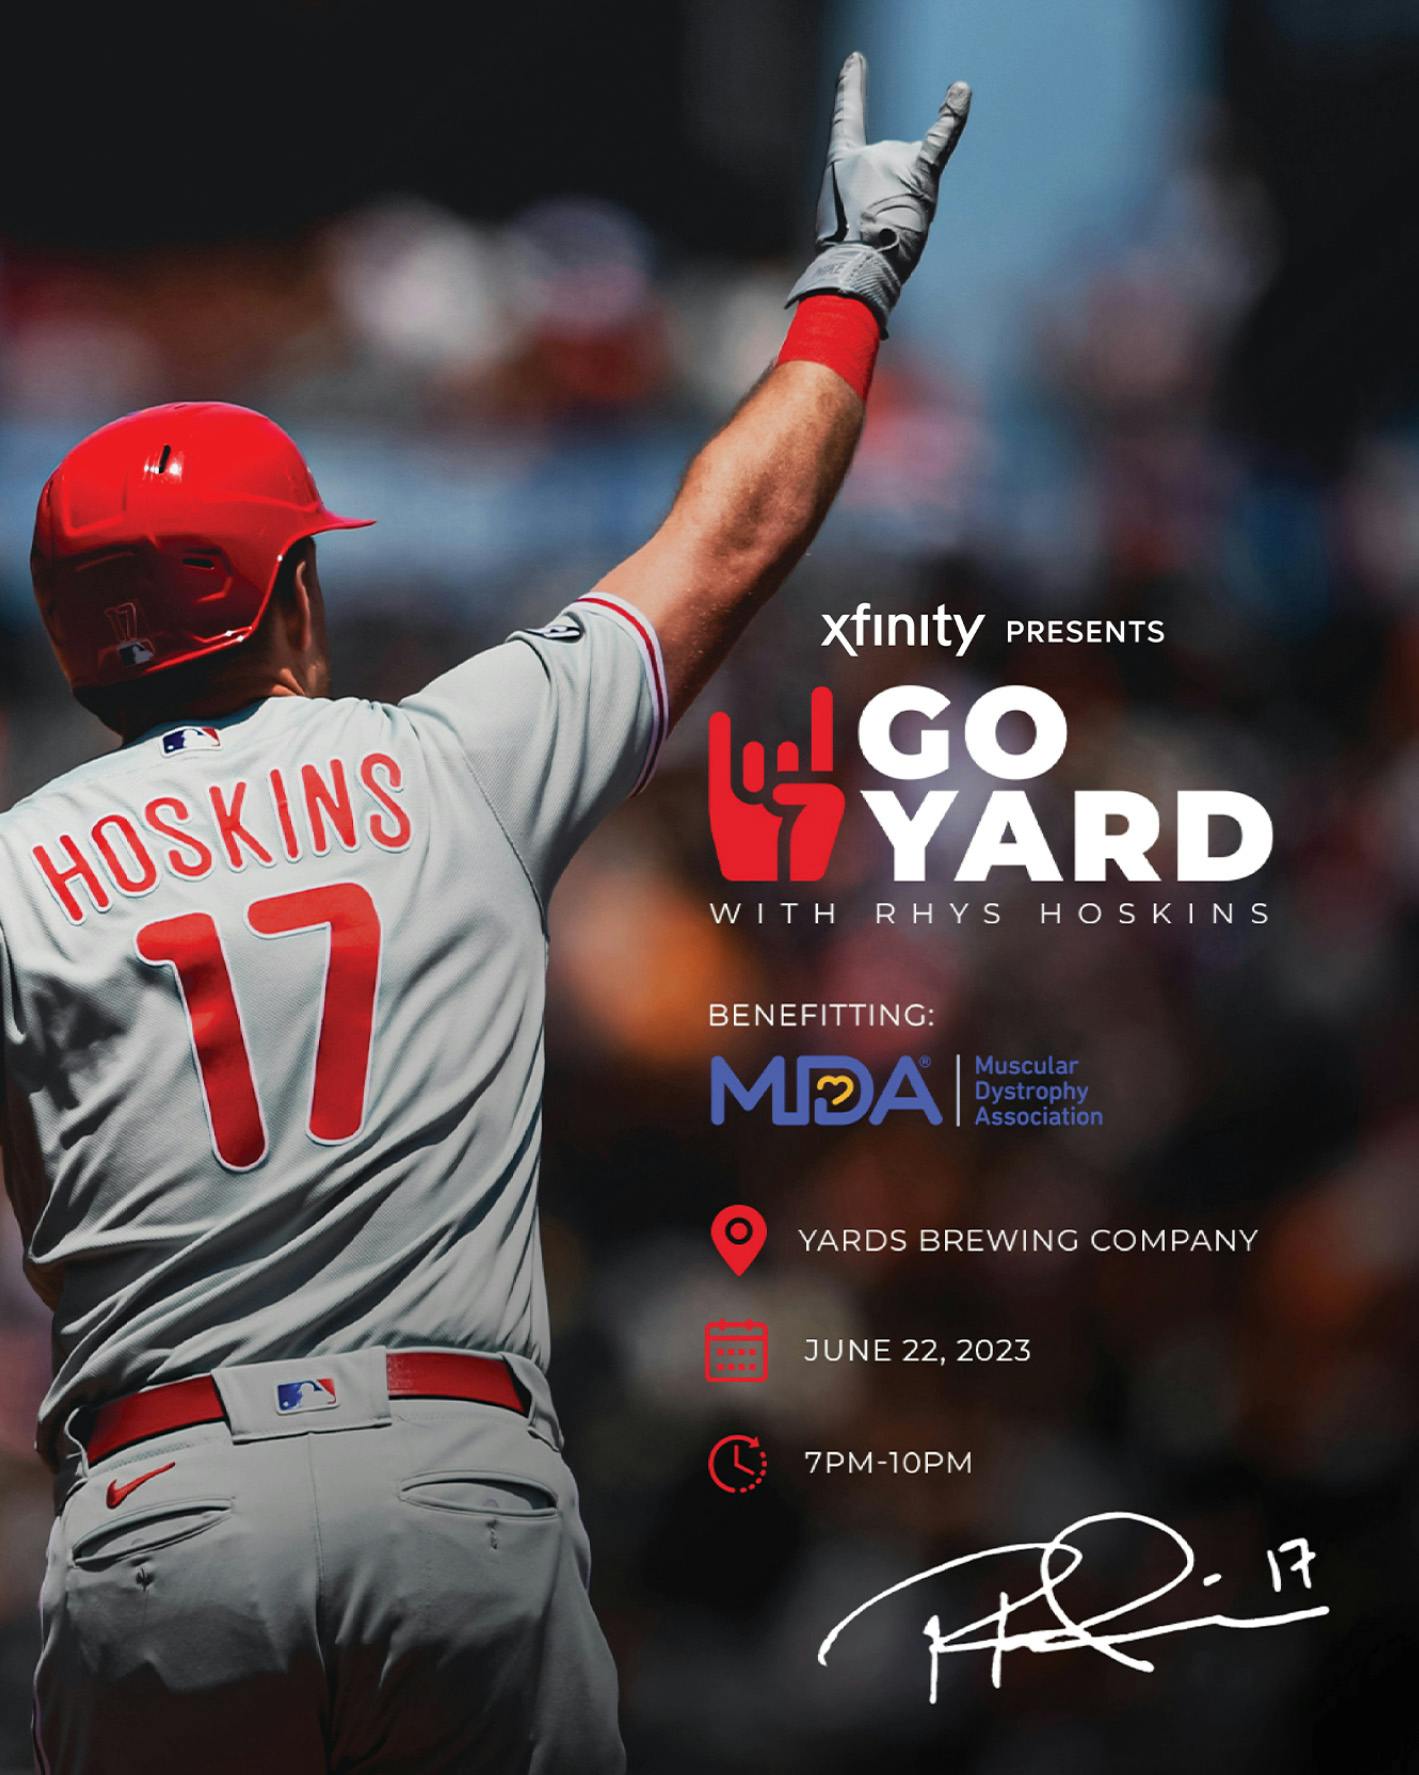 We're Proud To Support: Xfinity Presents – Go Yard with Rhys Hoskins  Benefiting Muscular Dystrophy Association